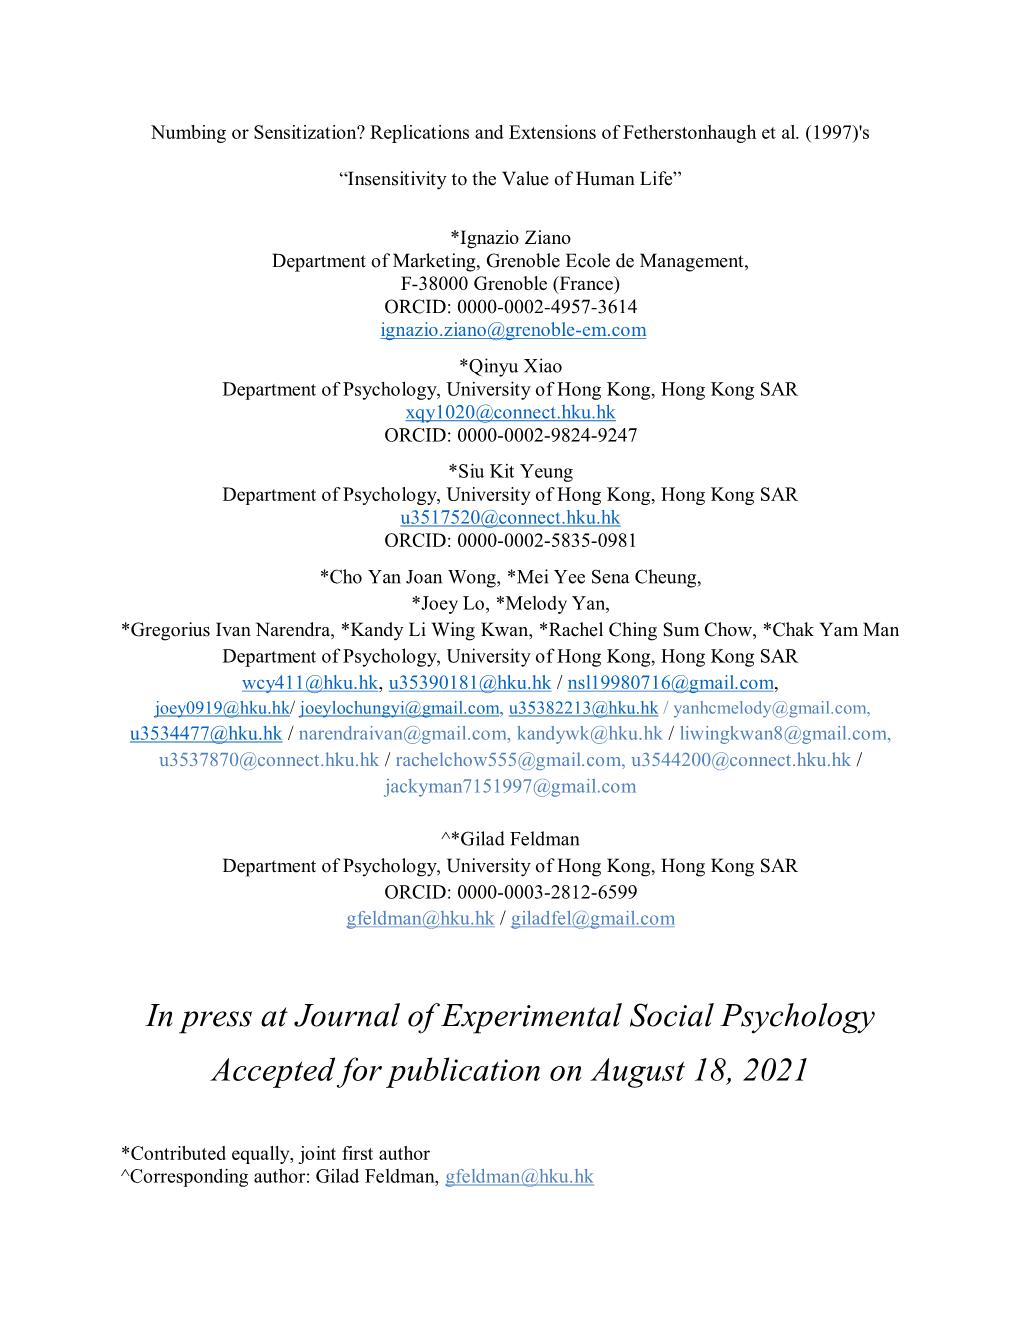 In Press at Journal of Experimental Social Psychology Accepted for Publication on August 18, 2021